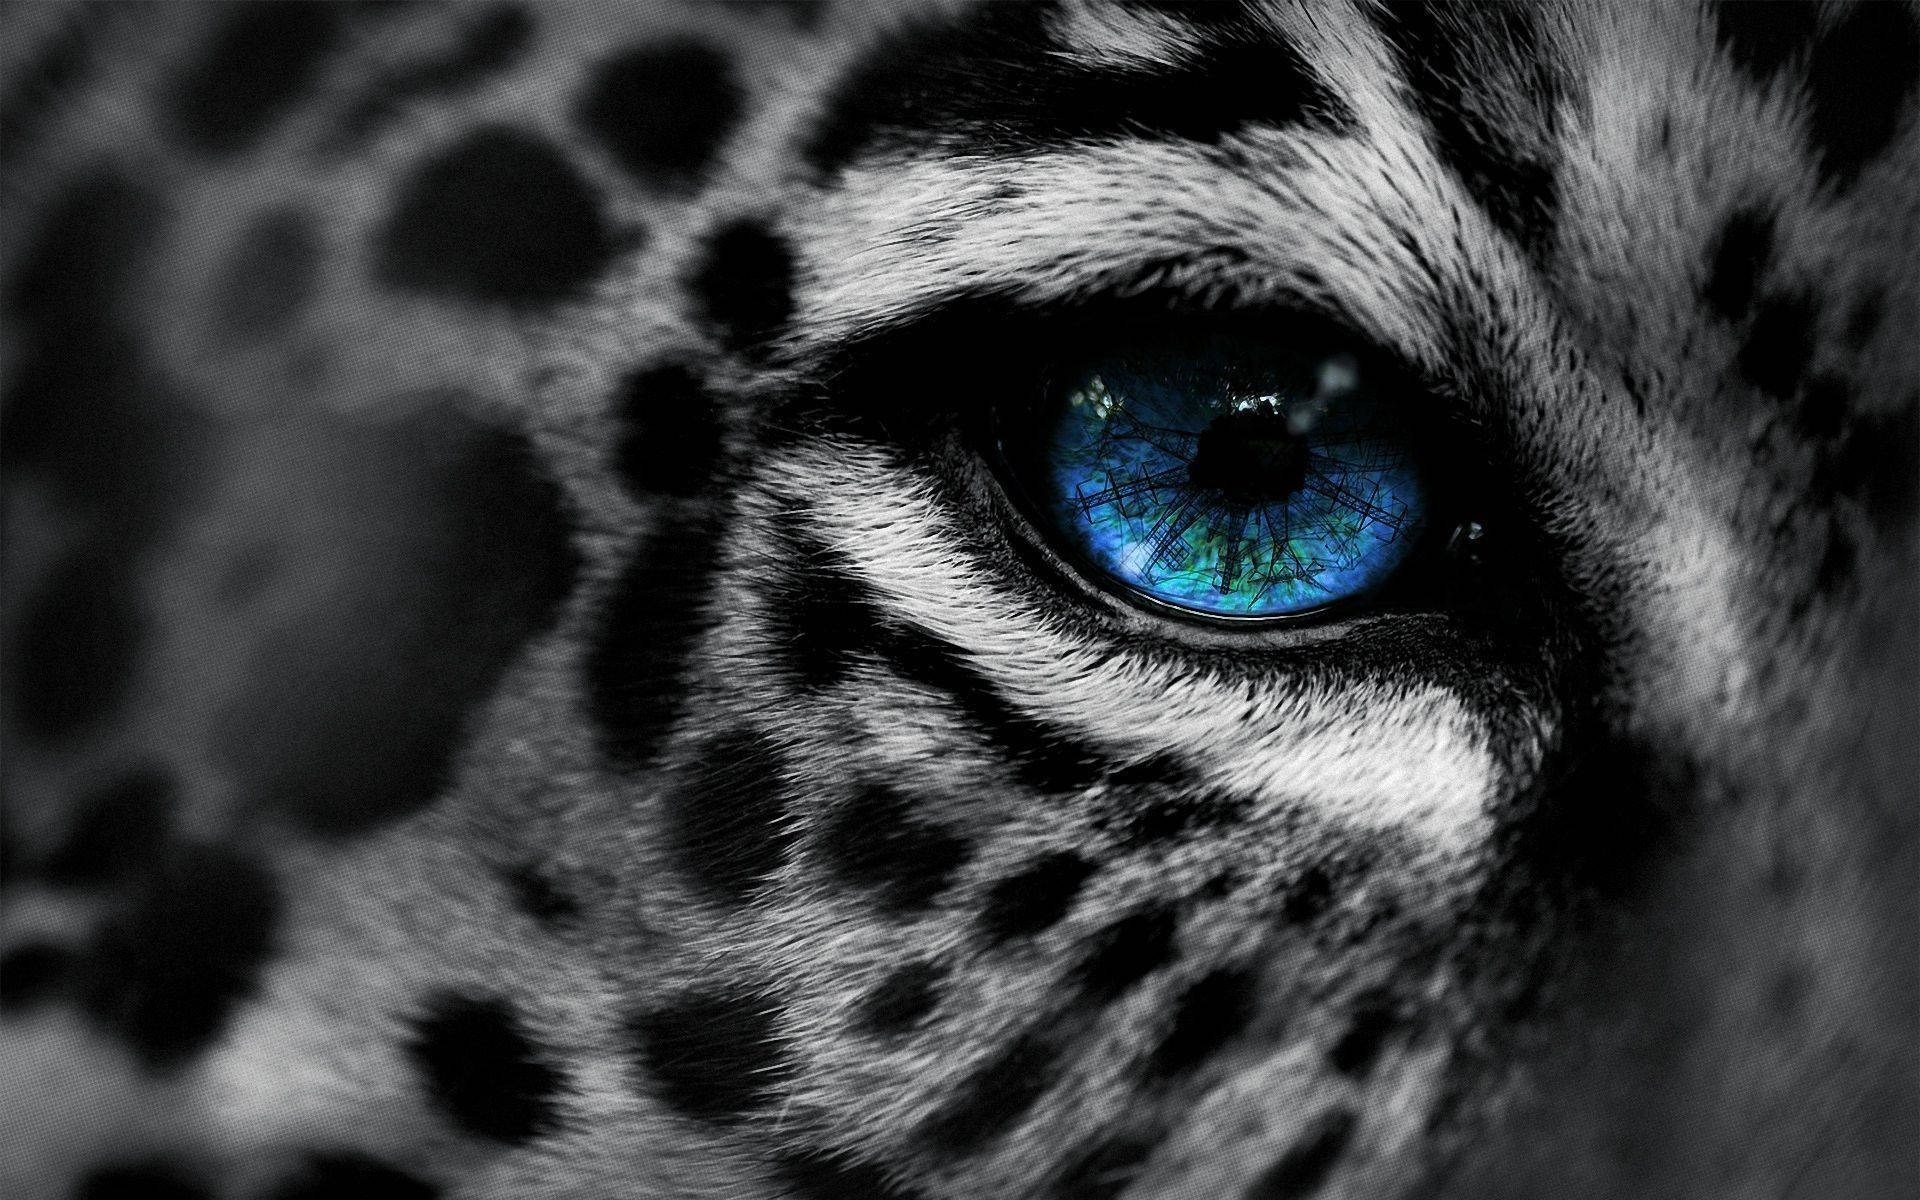 Leopard 1920X1200 Wallpaper and Background Image